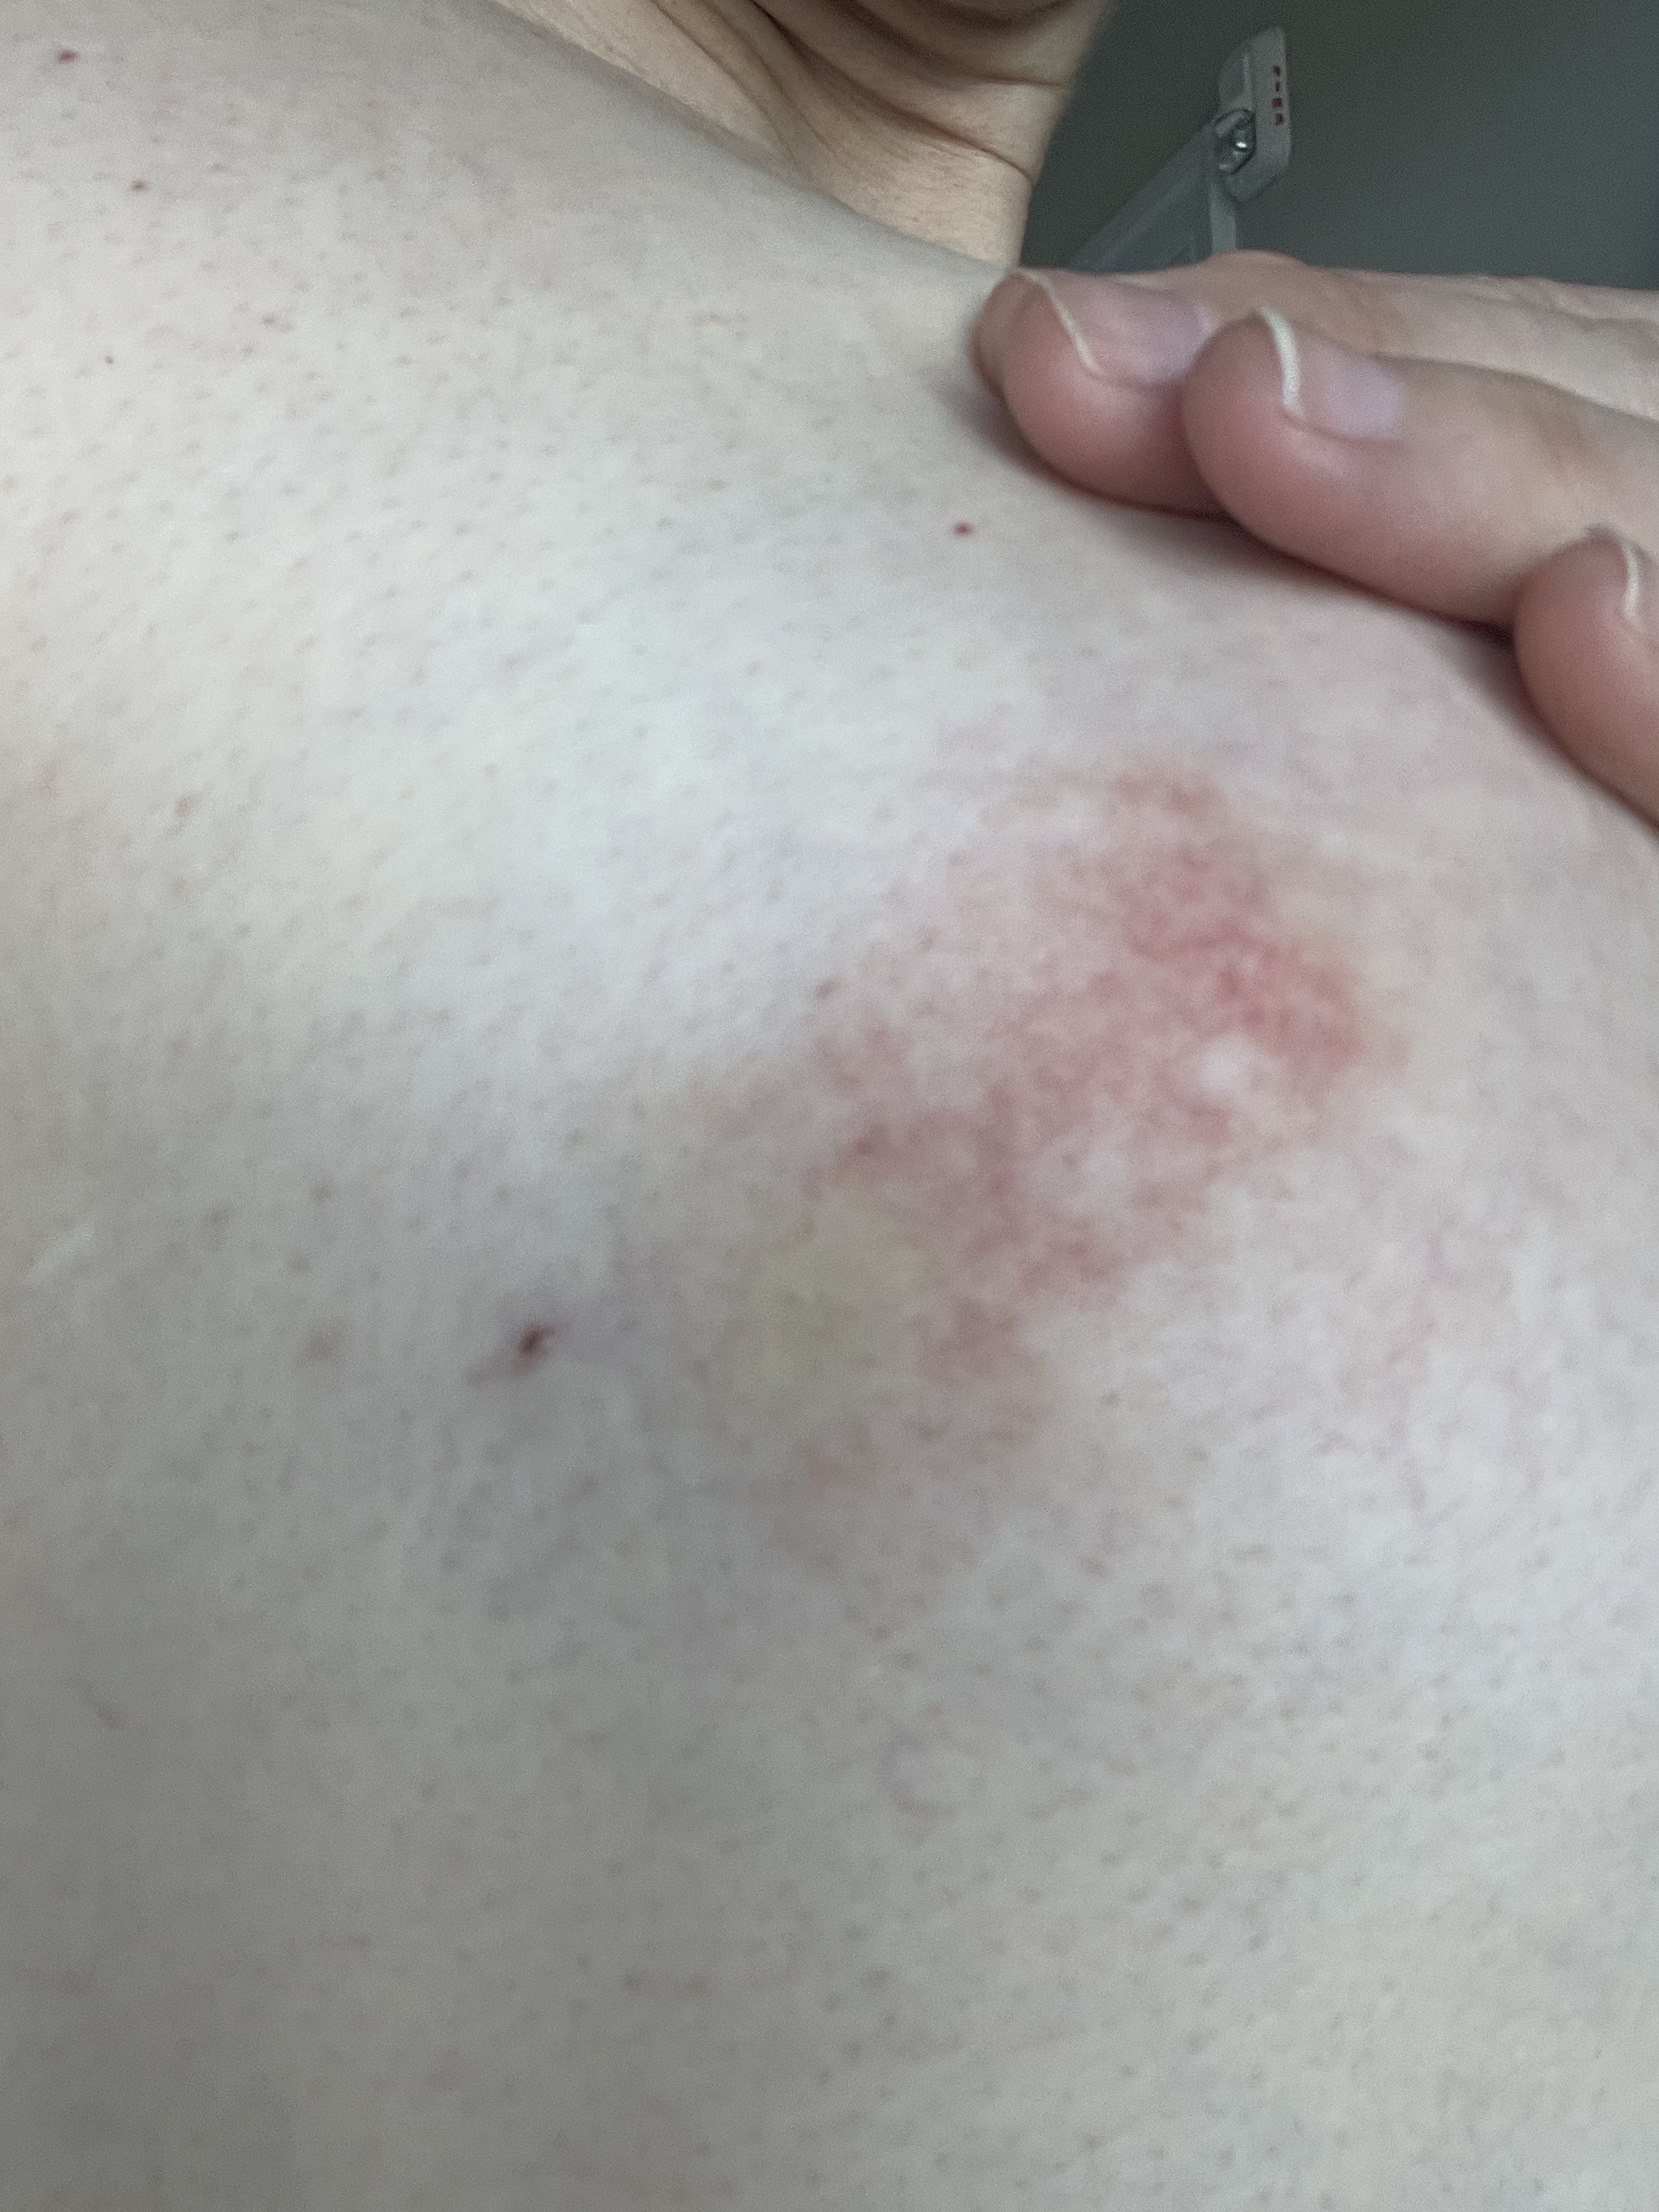 Small rash/ red irritation on side of breast that's toward middle